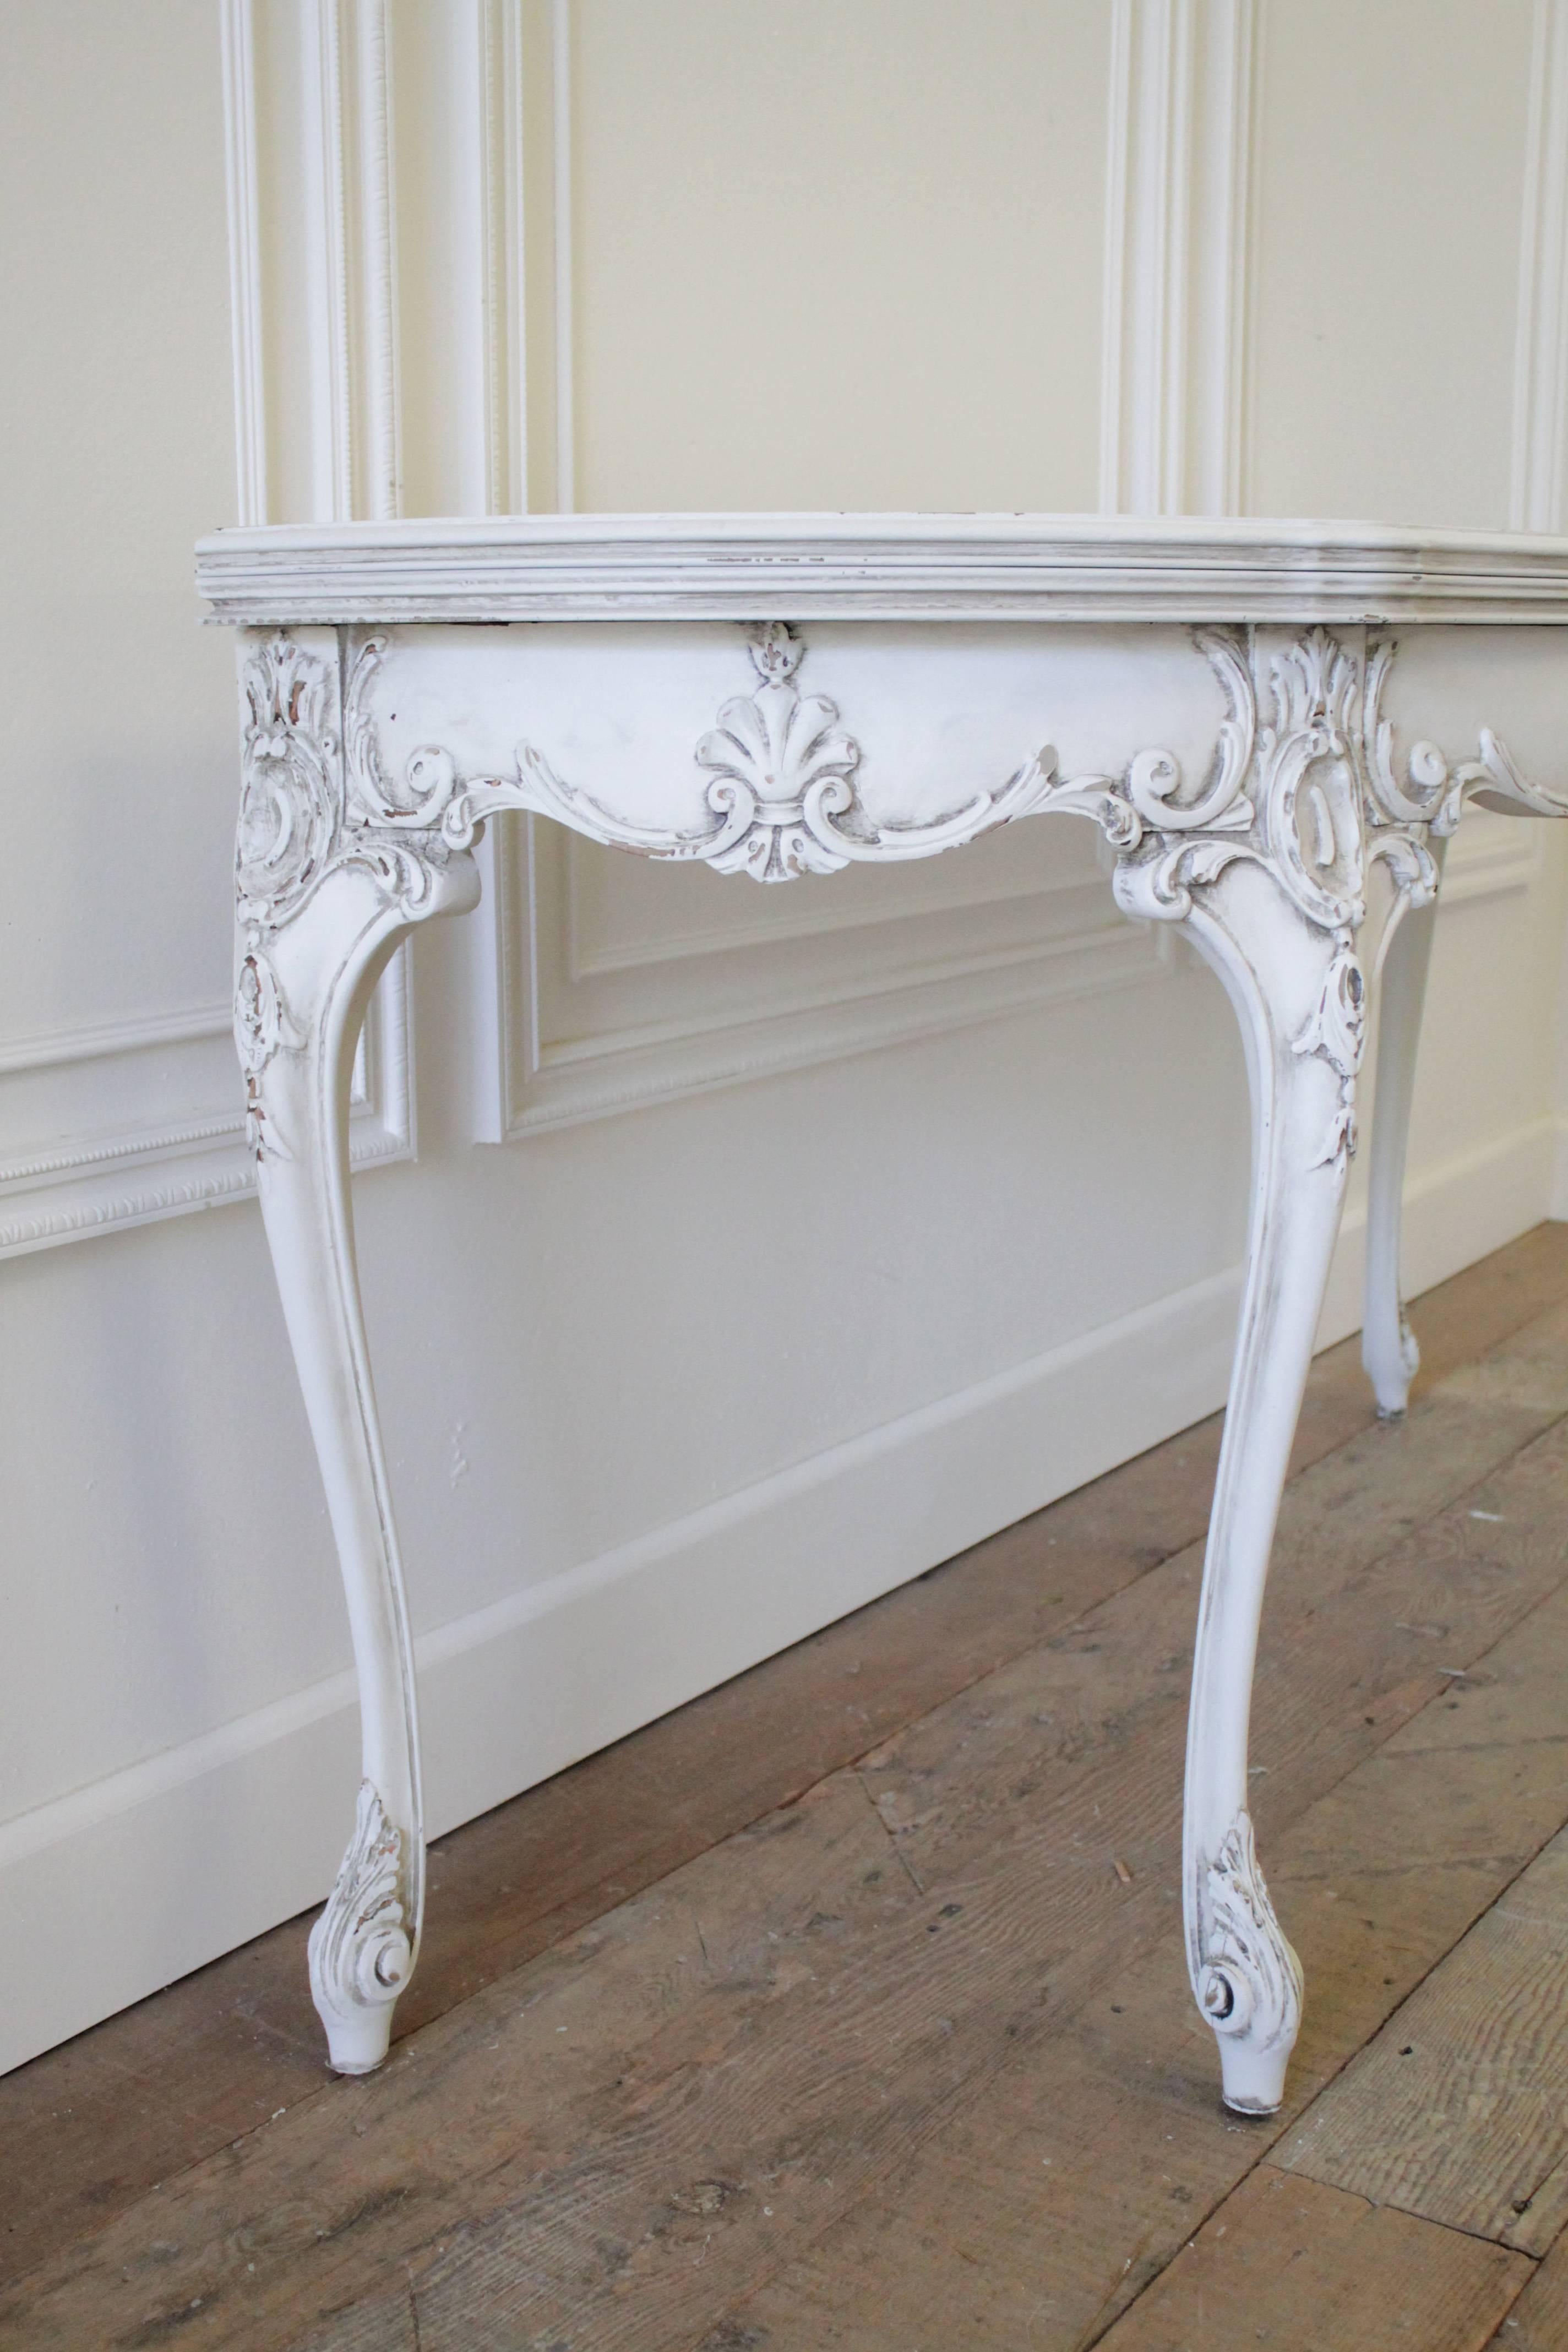 Lovely carved console in the Louis XV style is finished in our oyster white, with subtle distressing, and antique glaze patina. The table top does flip open to be used as a game table or small dining table.
Measures: 60